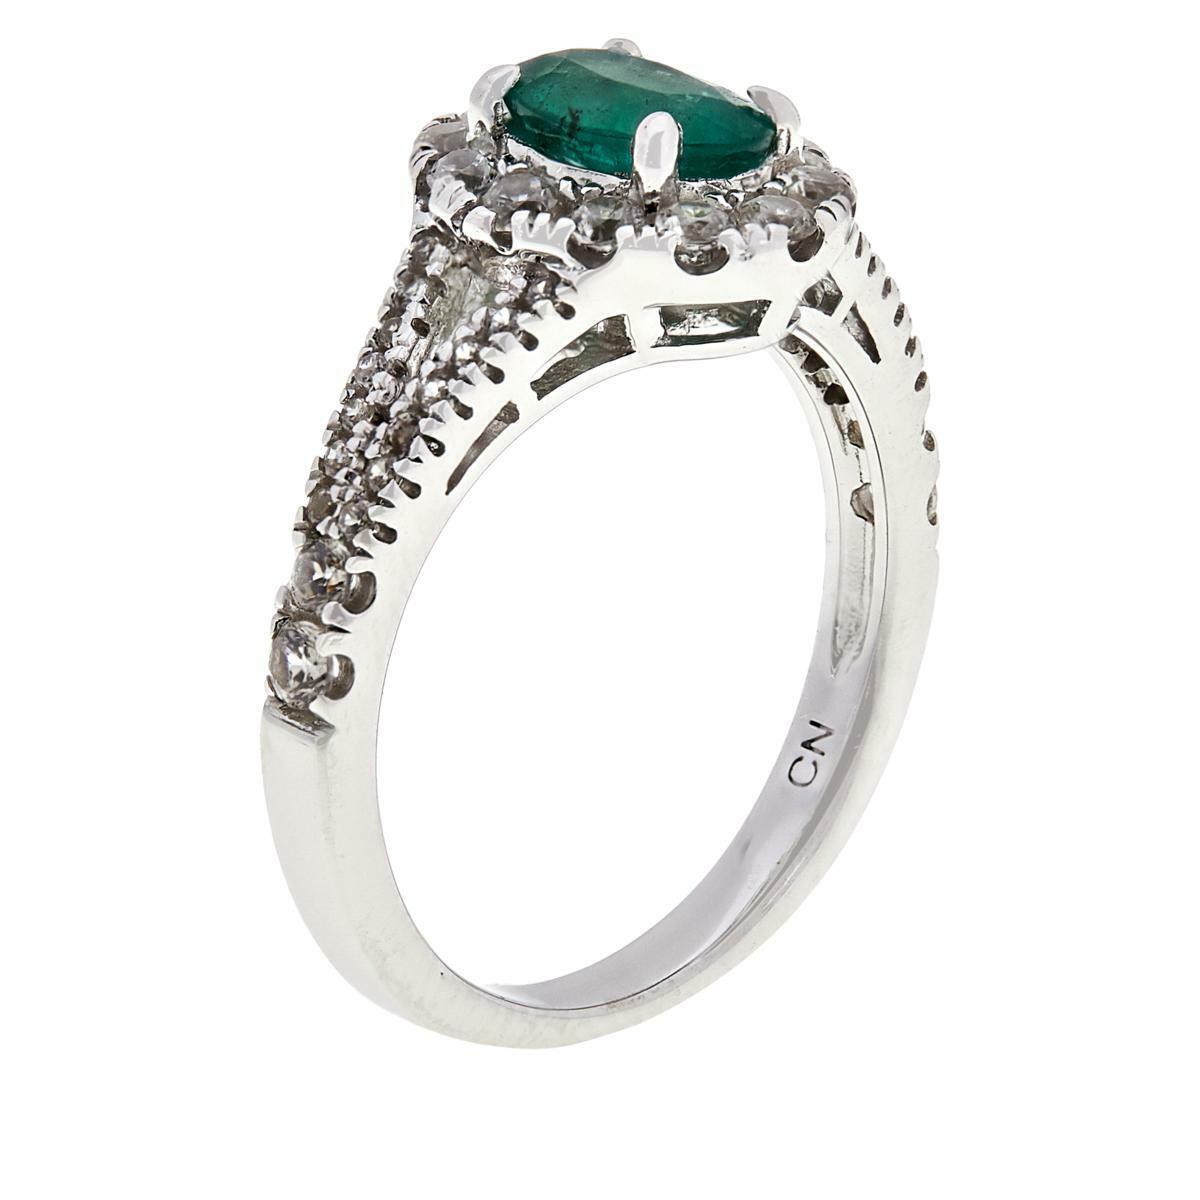 Rarities Sterling Silver Oval Emerald & White Zircon Halo-Design Ring, Size 6